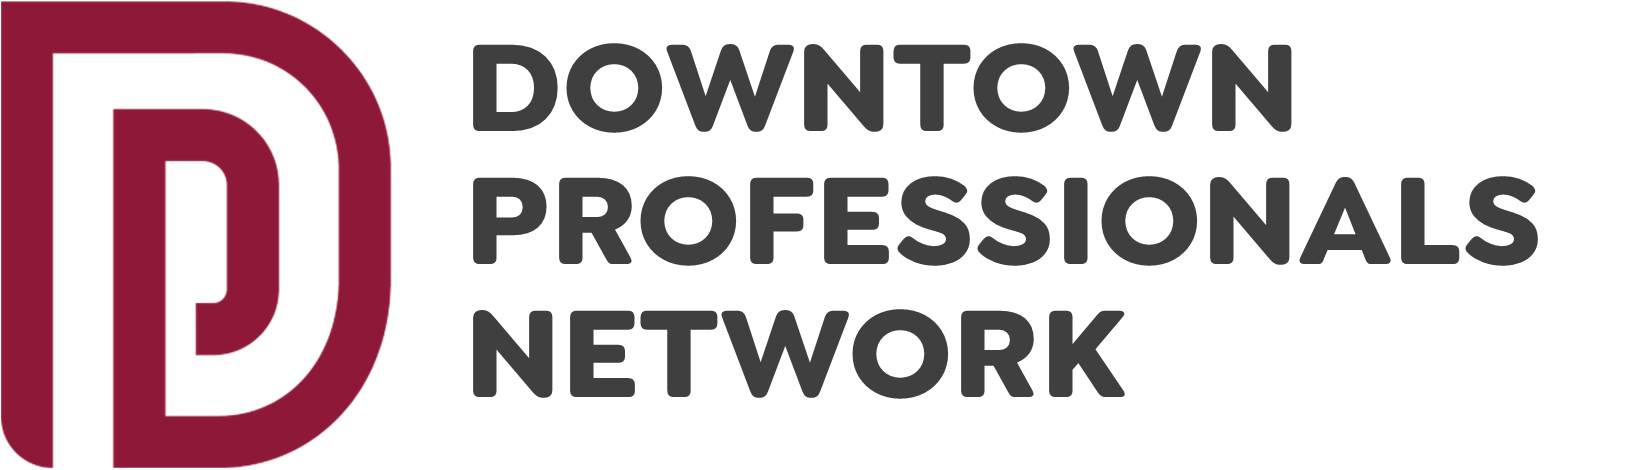 Downtown Professionals Network